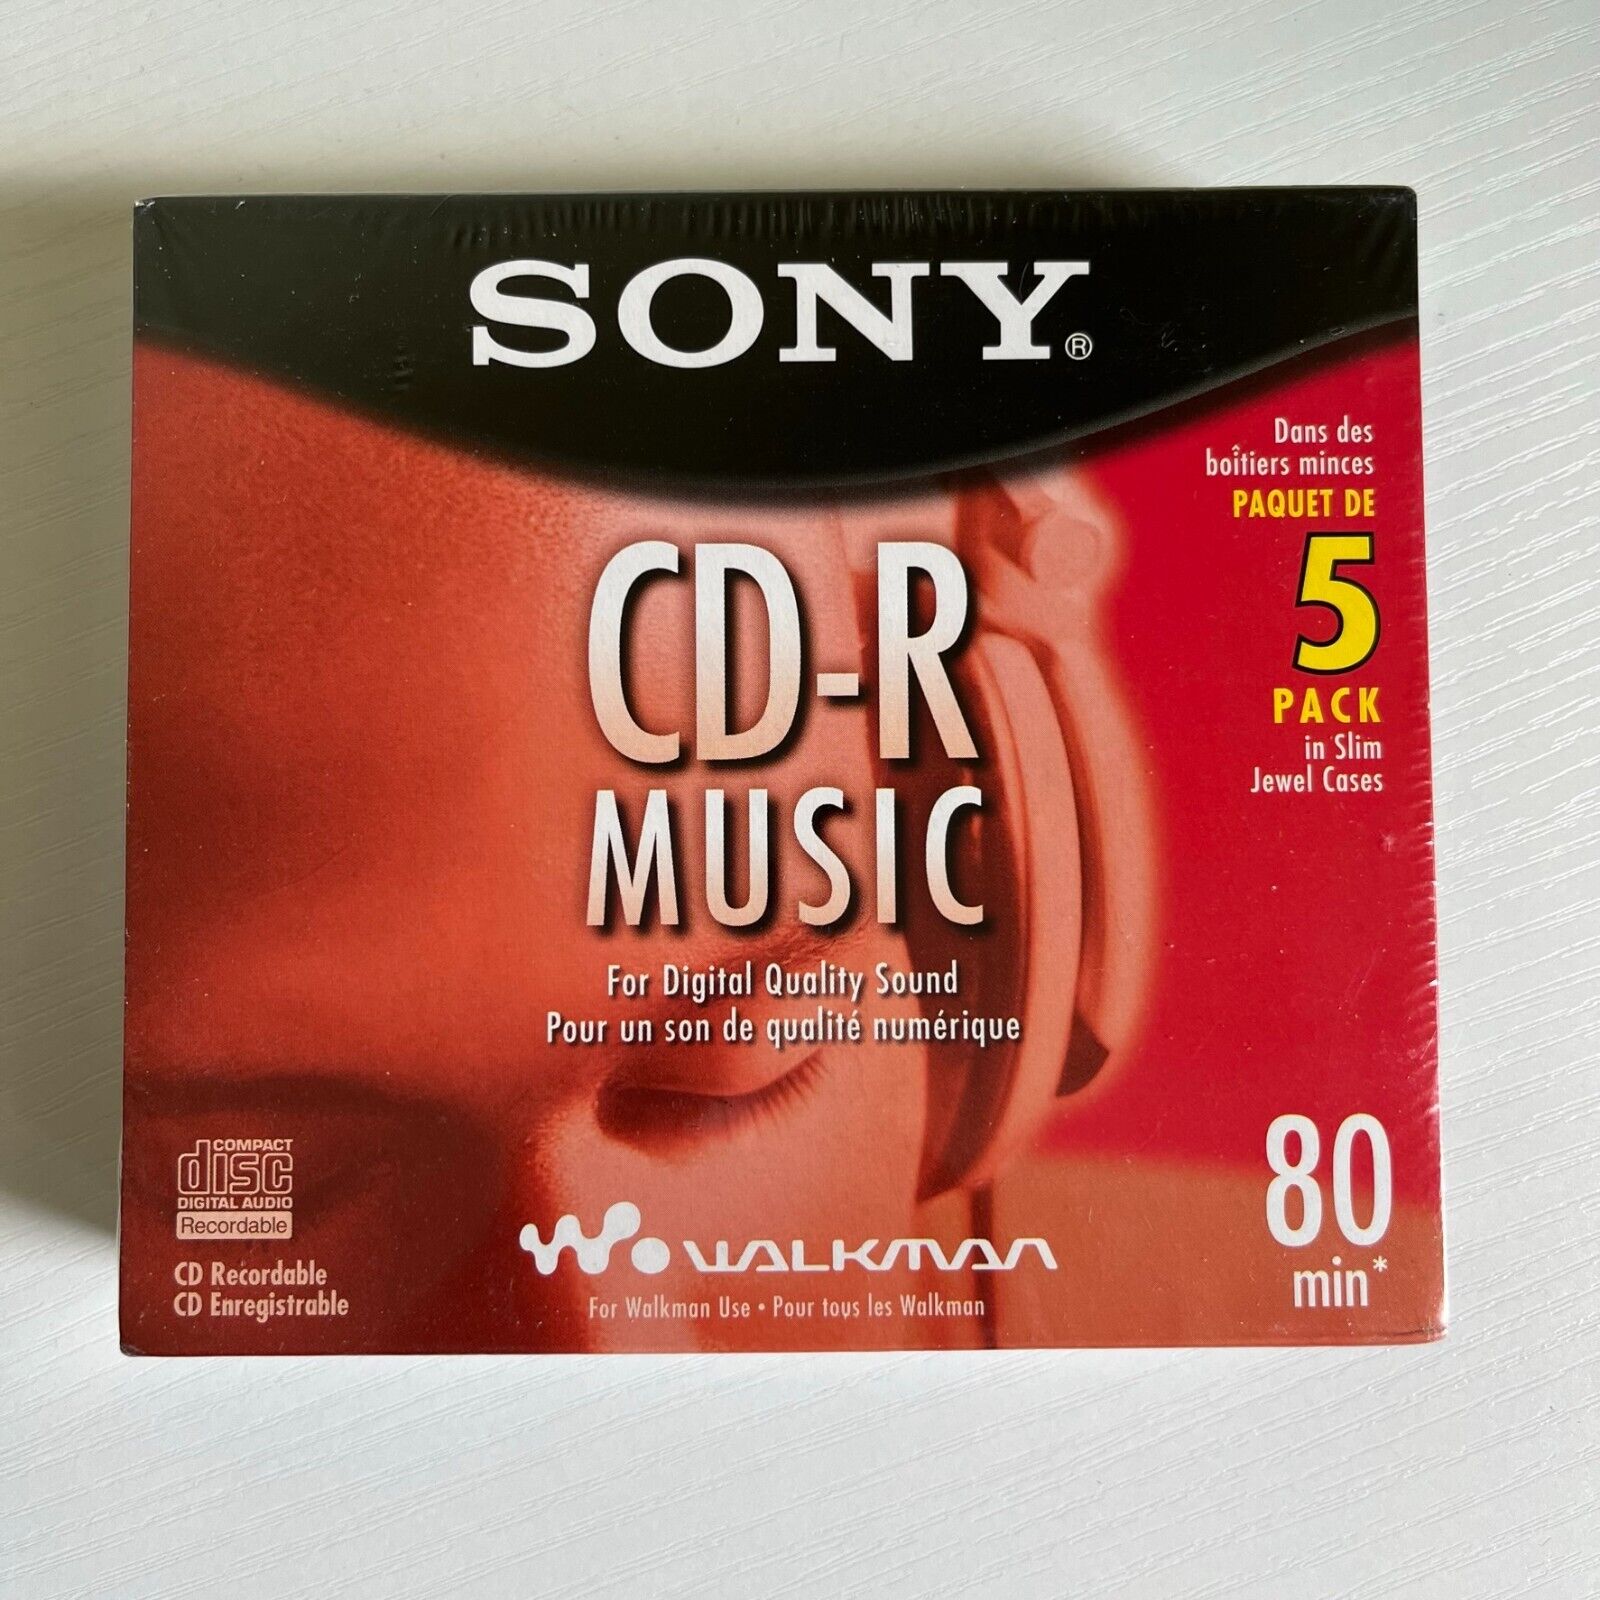 New Sealed Sony CD-R Audio Music 5 CDs Pack Recordable In Slim Jewel Cases 